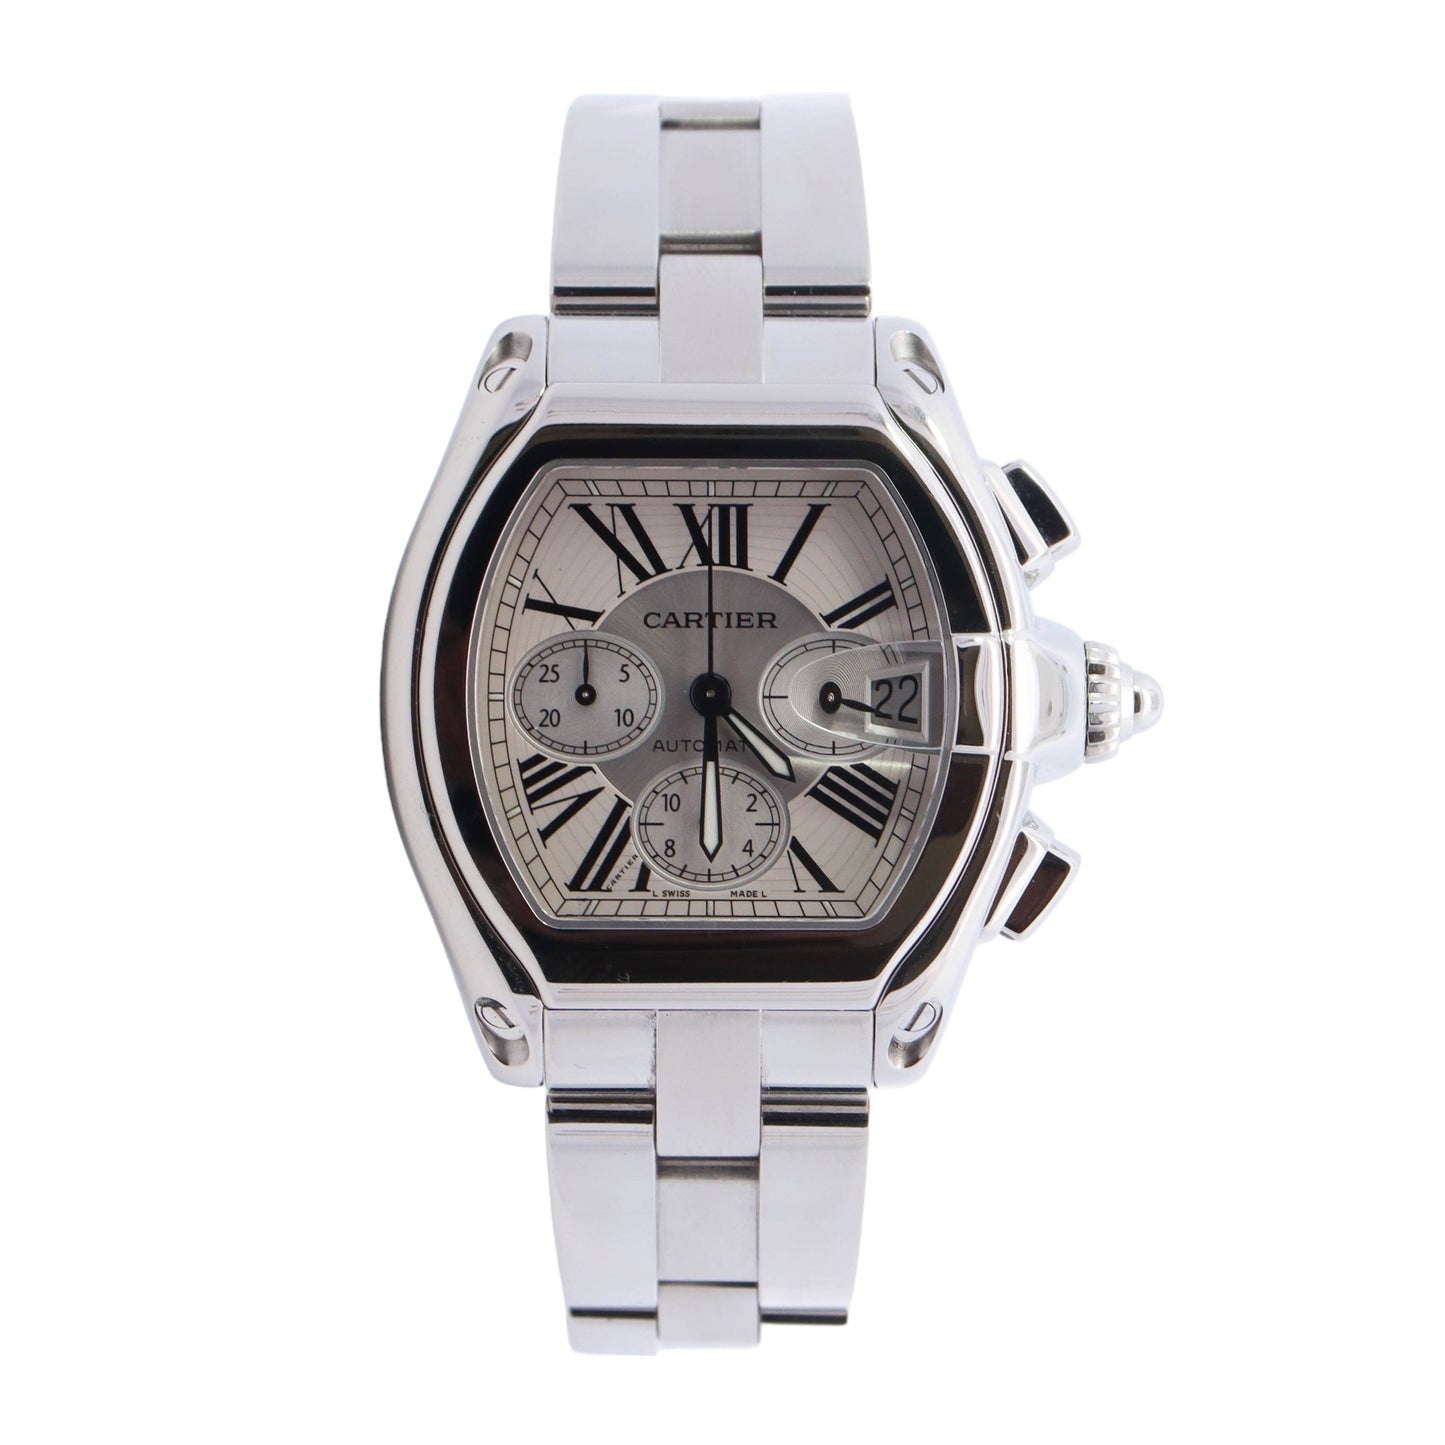 Cartier Roadster Chronograph Stainless Steel 38mm X 43mm Silver Chronograph Roman Dial Watch  Reference #: W62019X6 - Happy Jewelers Fine Jewelry Lifetime Warranty